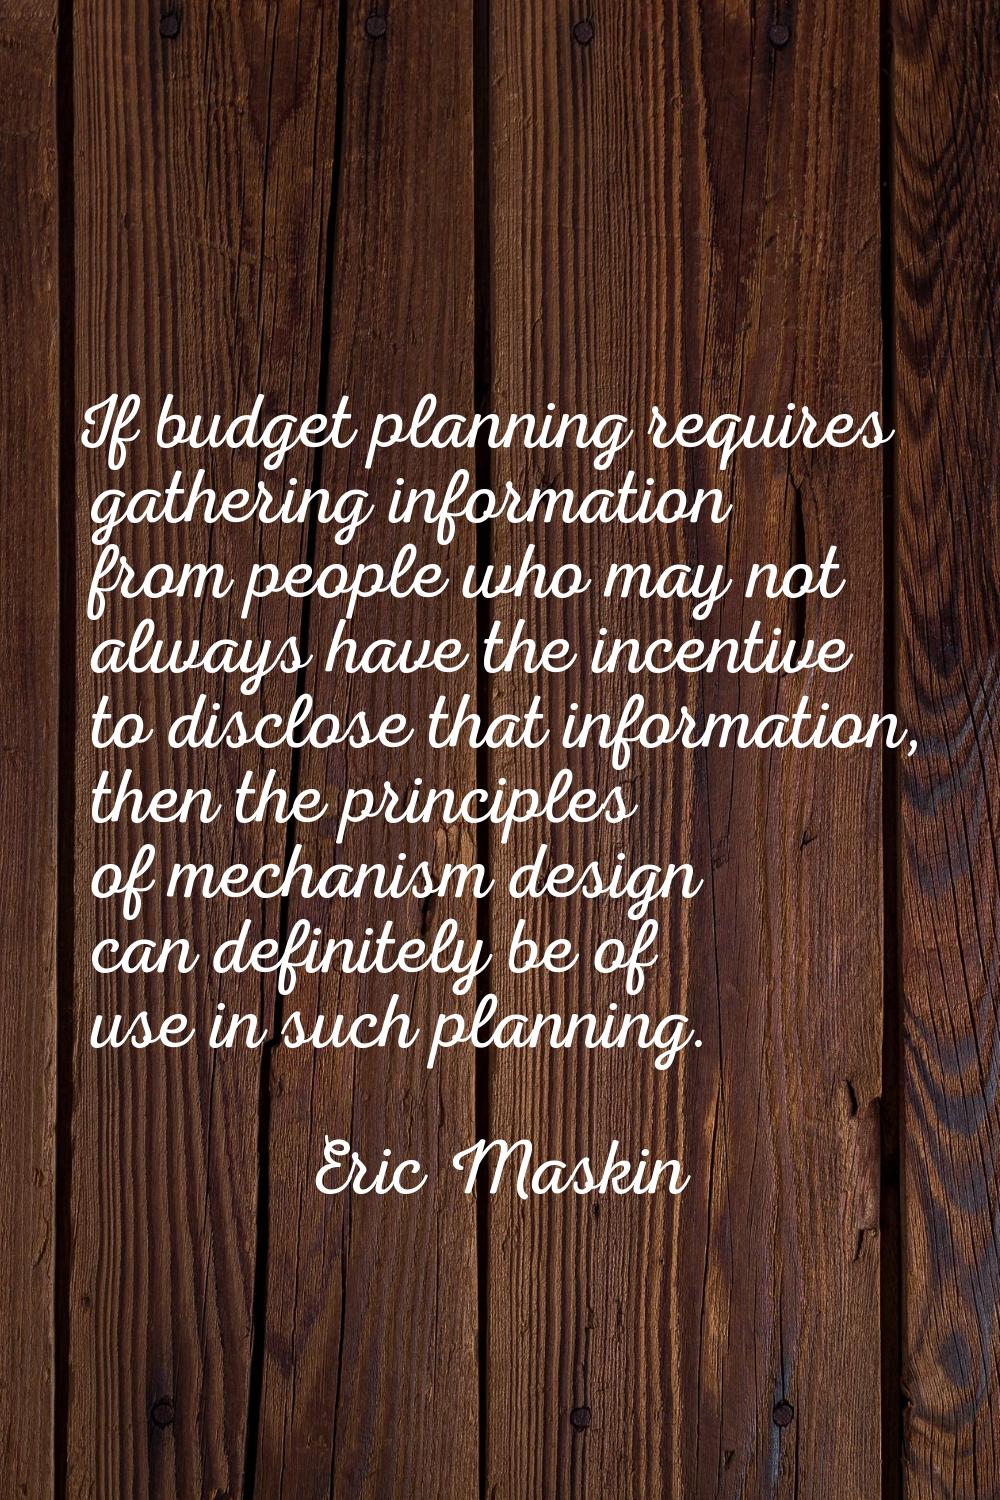 If budget planning requires gathering information from people who may not always have the incentive